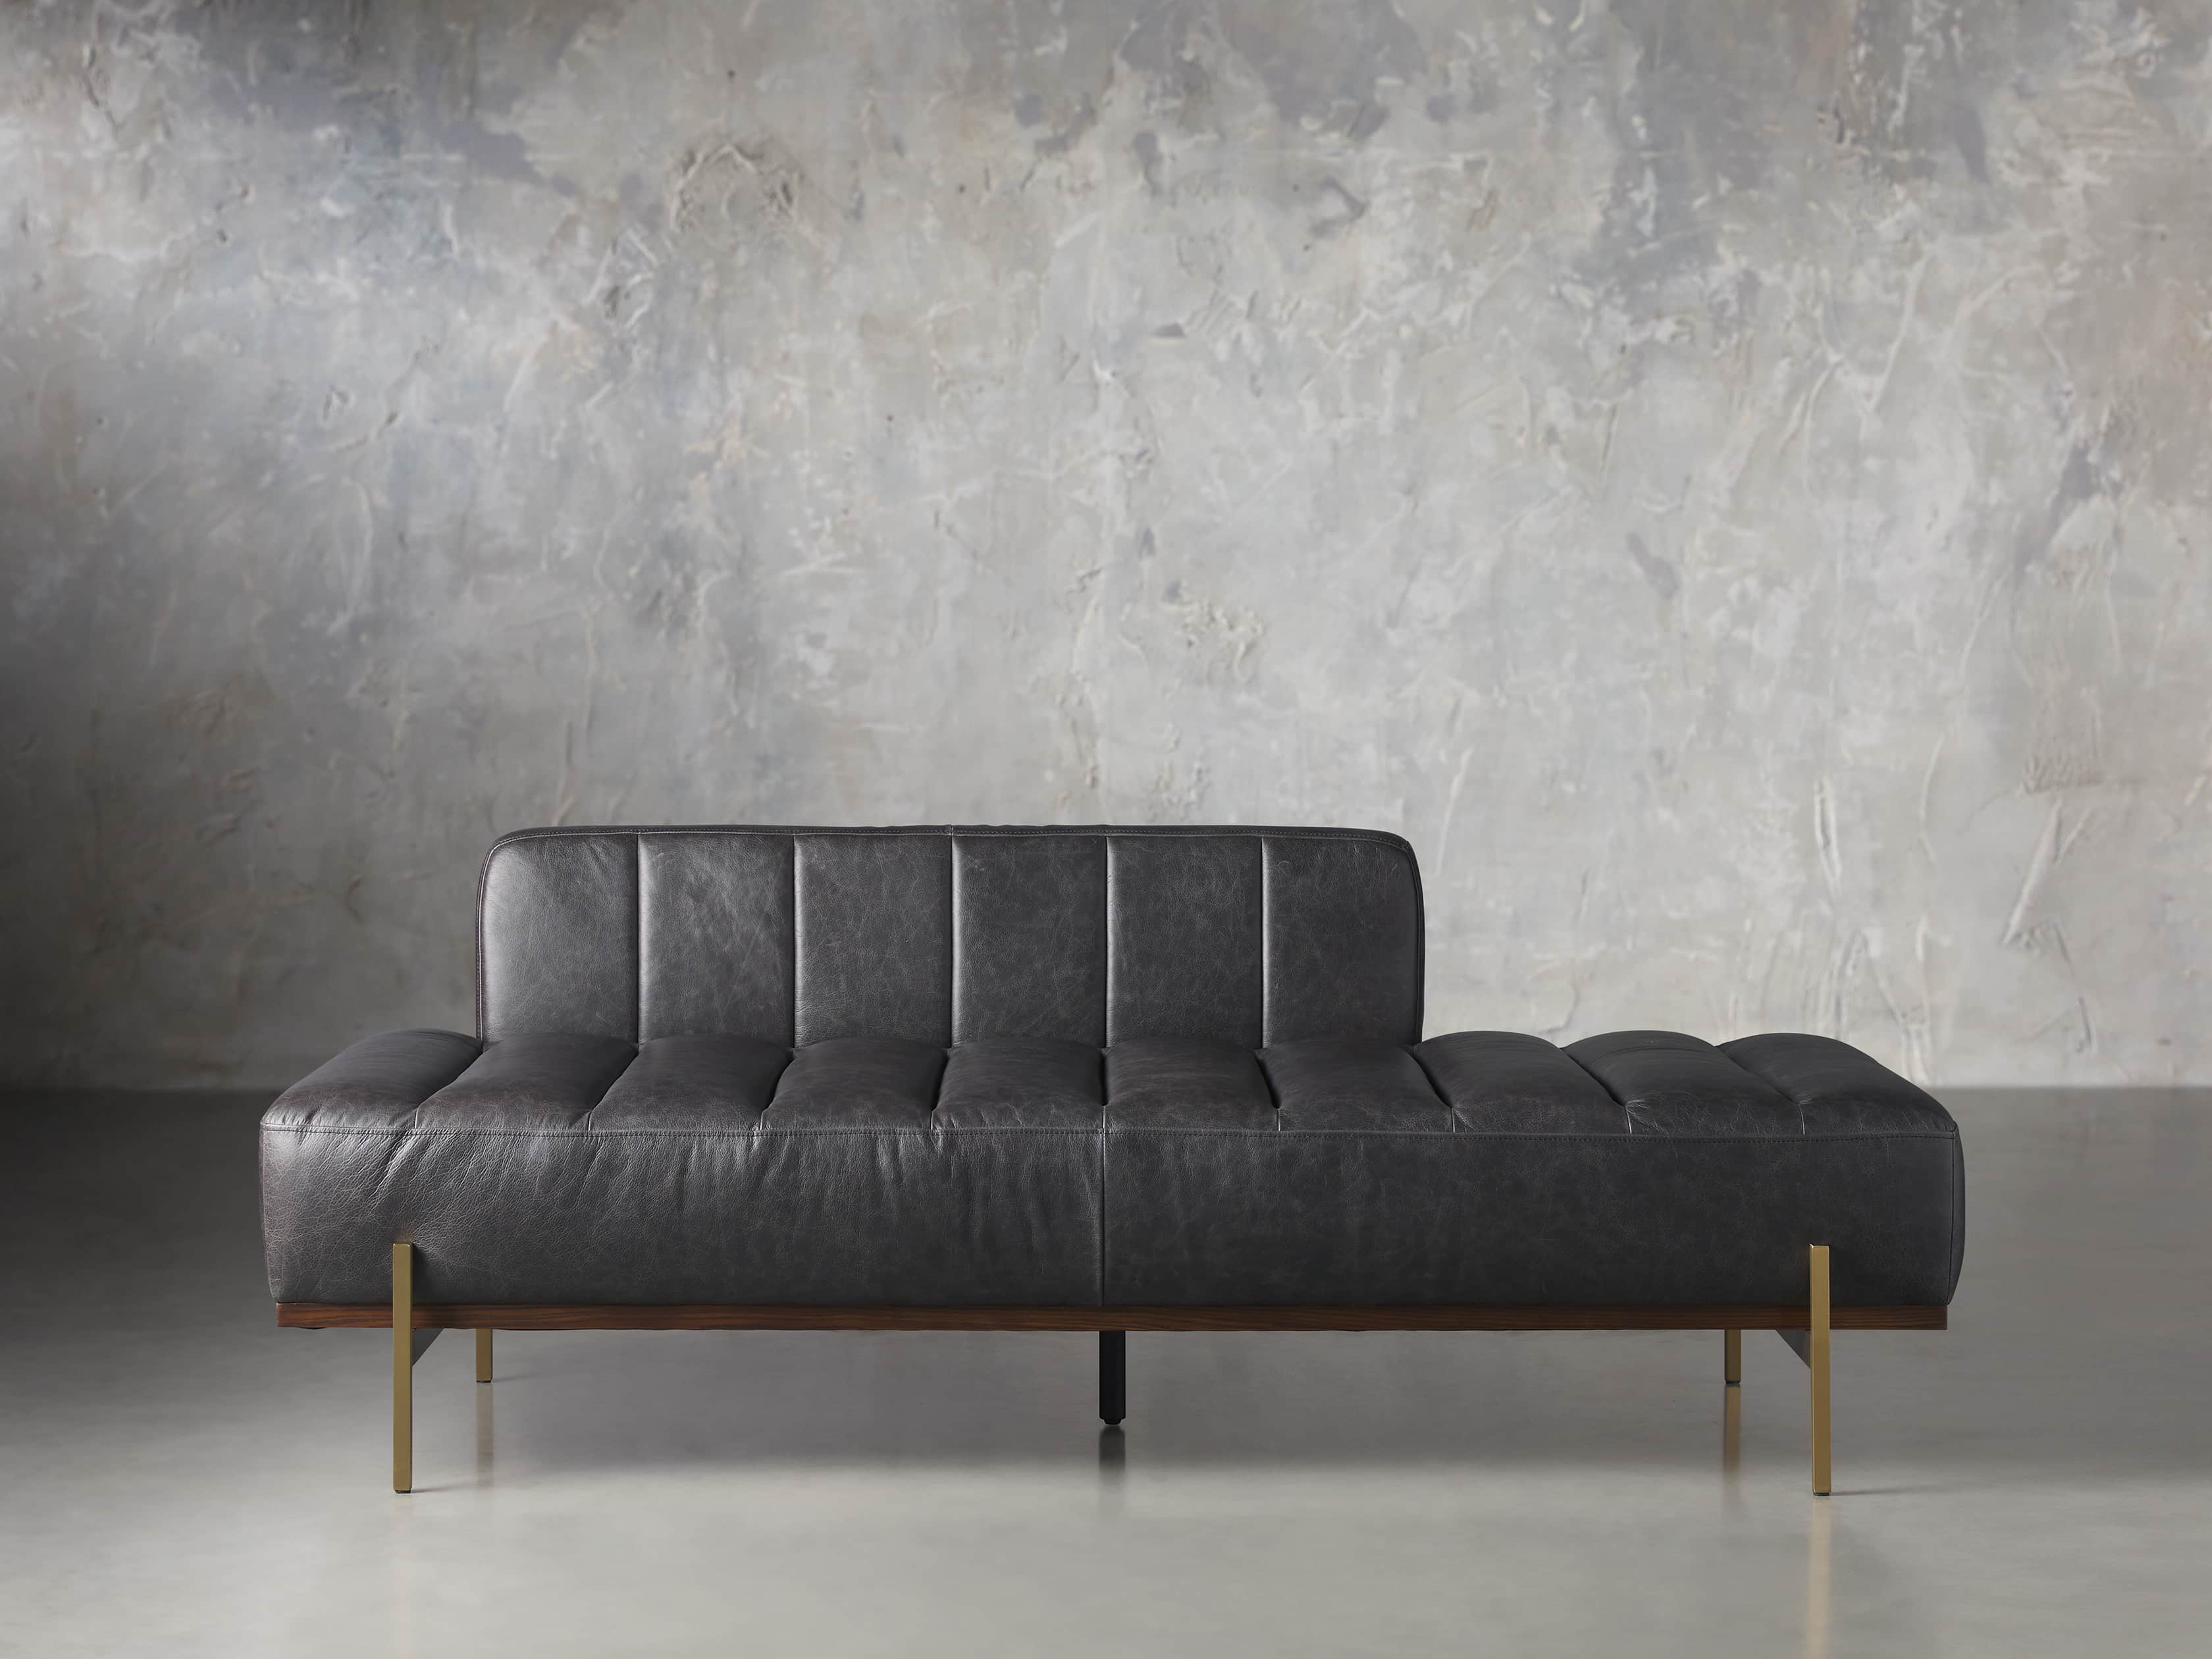 Lansing Leather Daybed Arhaus, Day Bed Leather